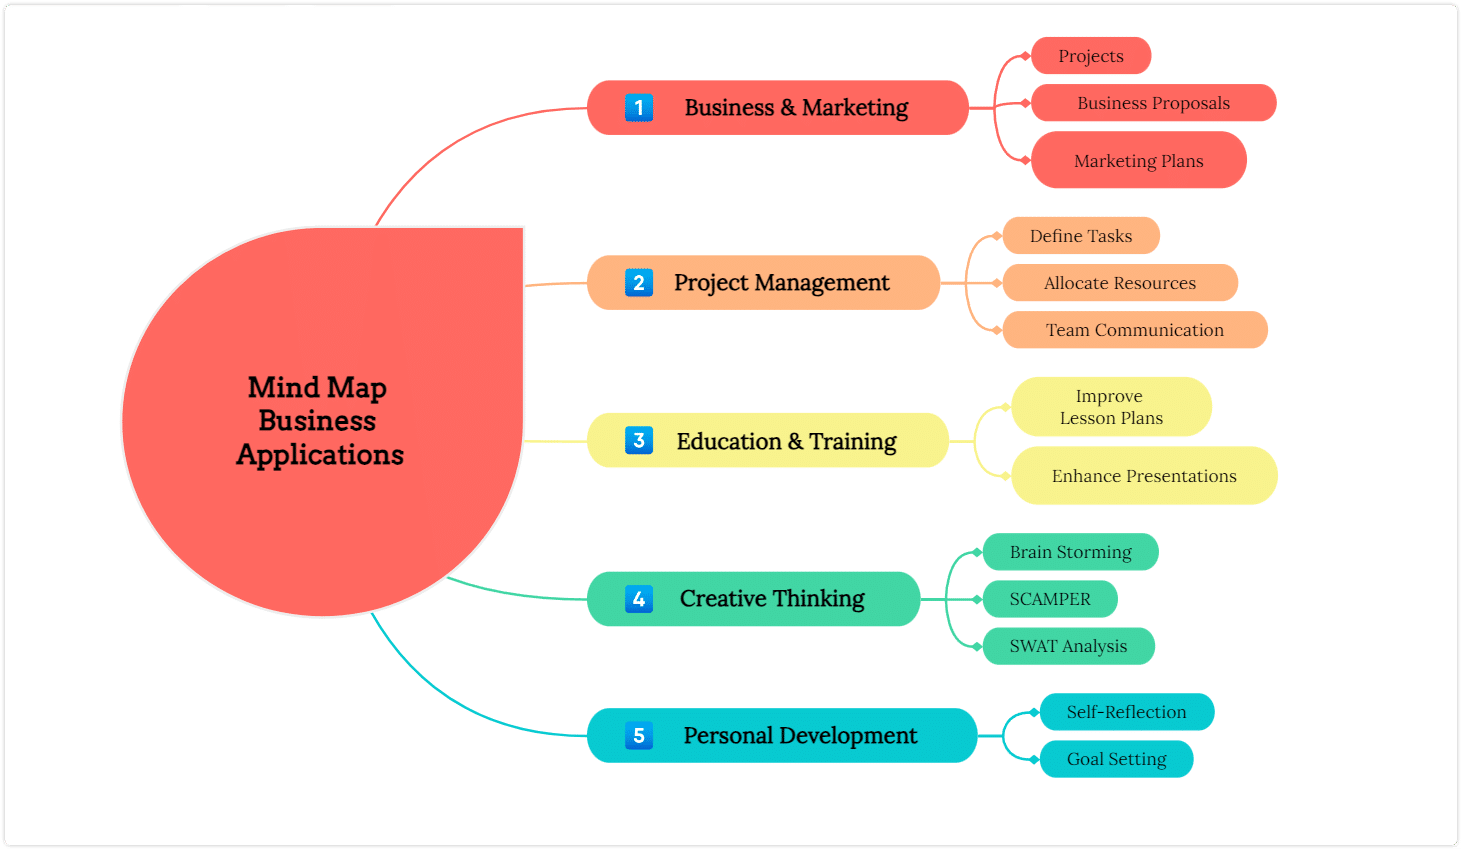 Mind Map Business Applications